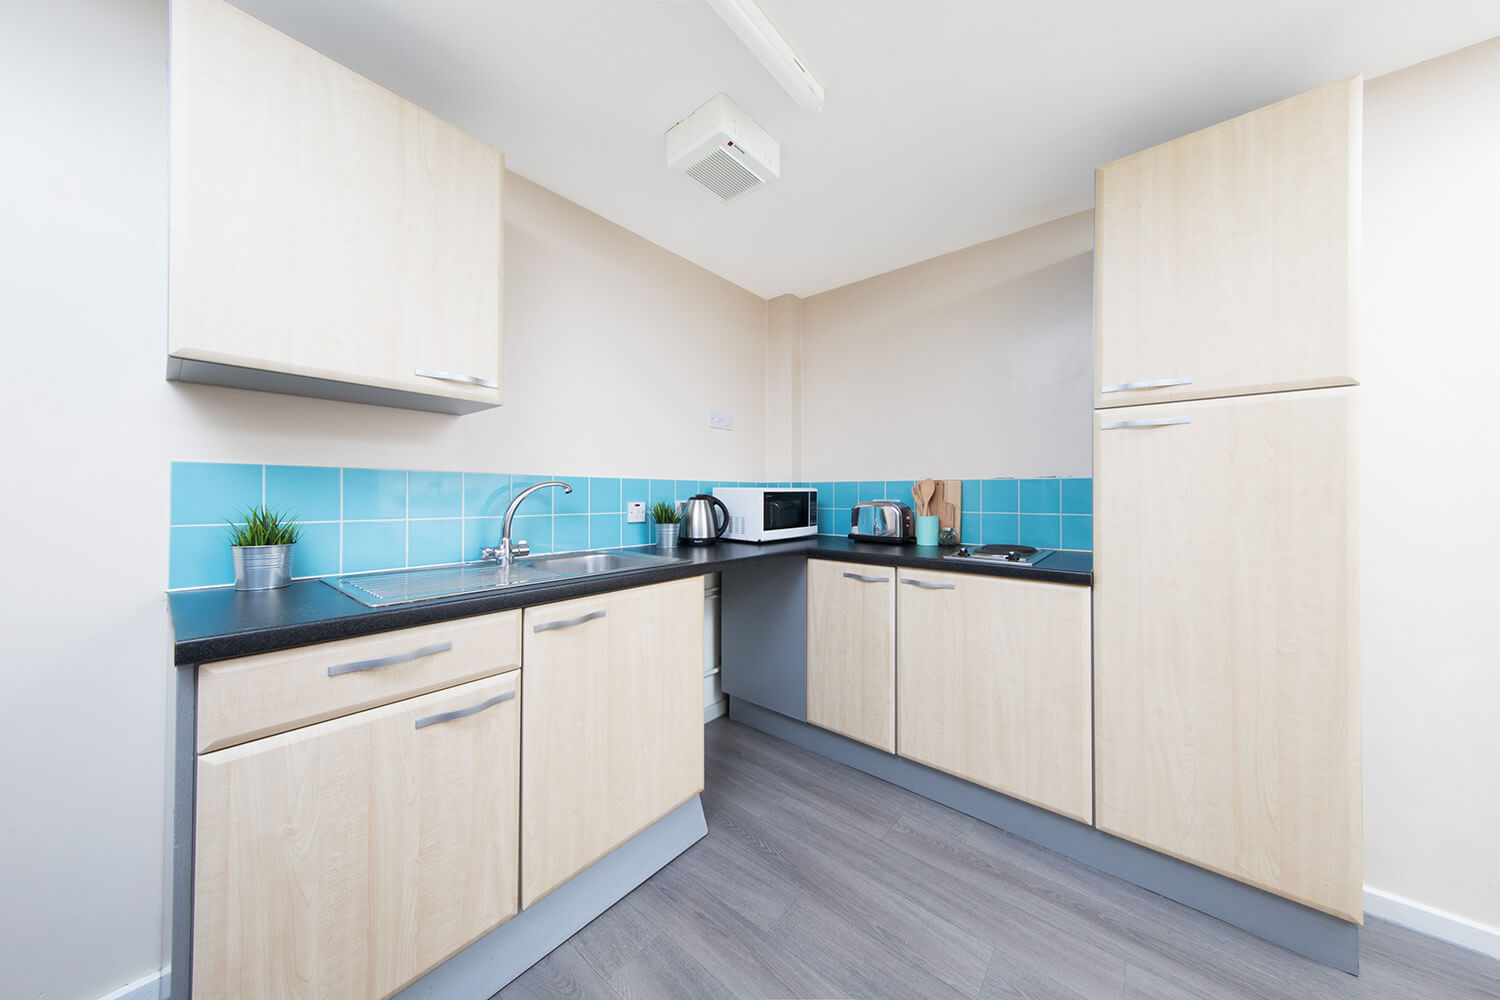 Student accommodation shared kitchen for non en-suite rooms in Liverpool